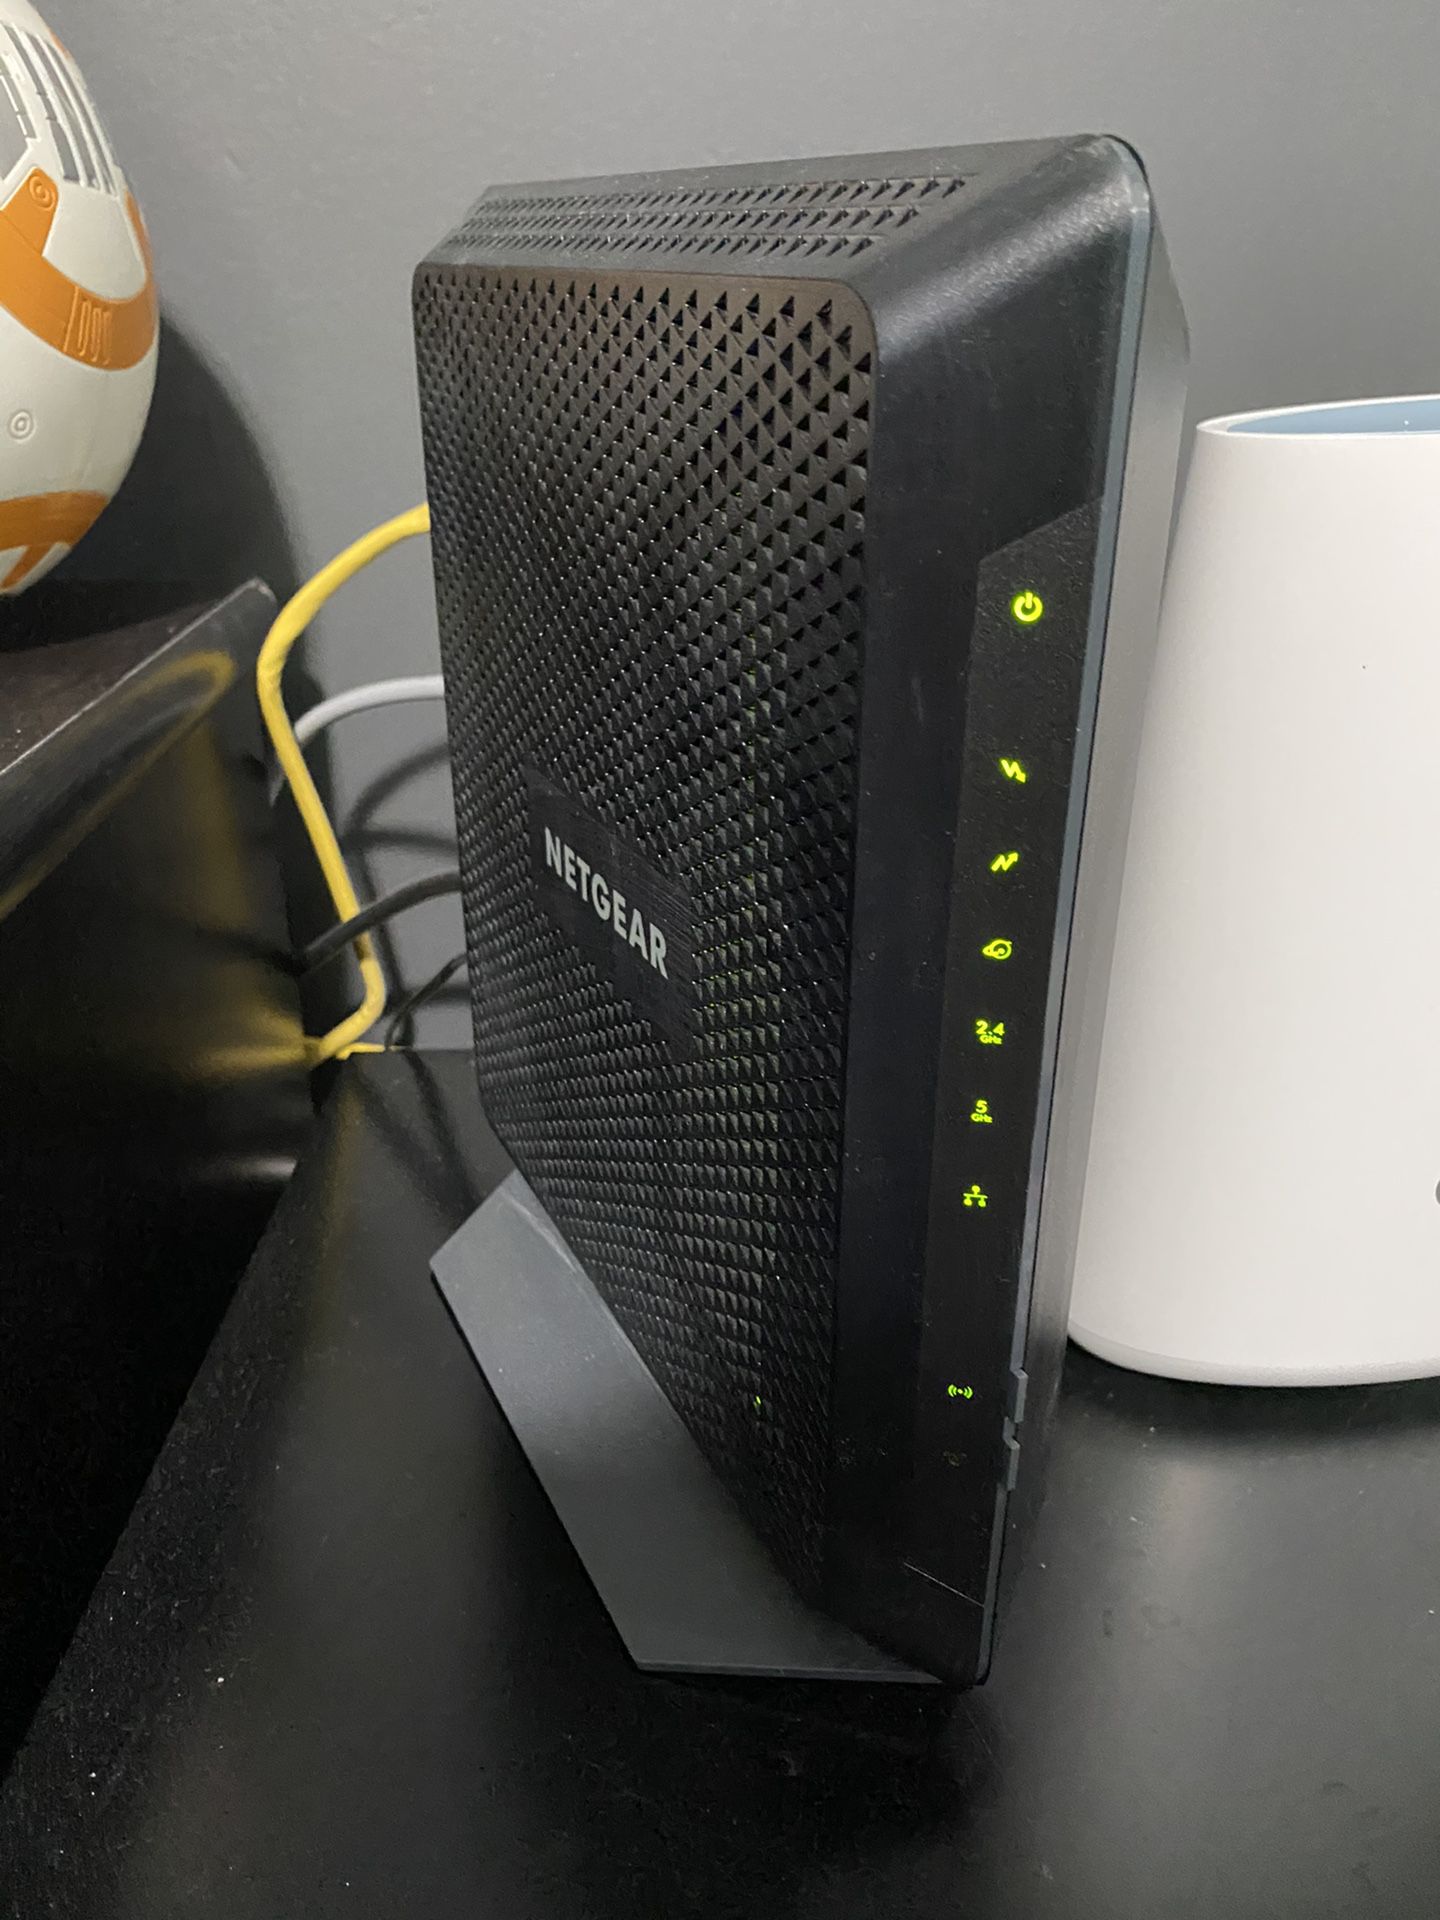 Netgear router modem speed up to 1gb $100